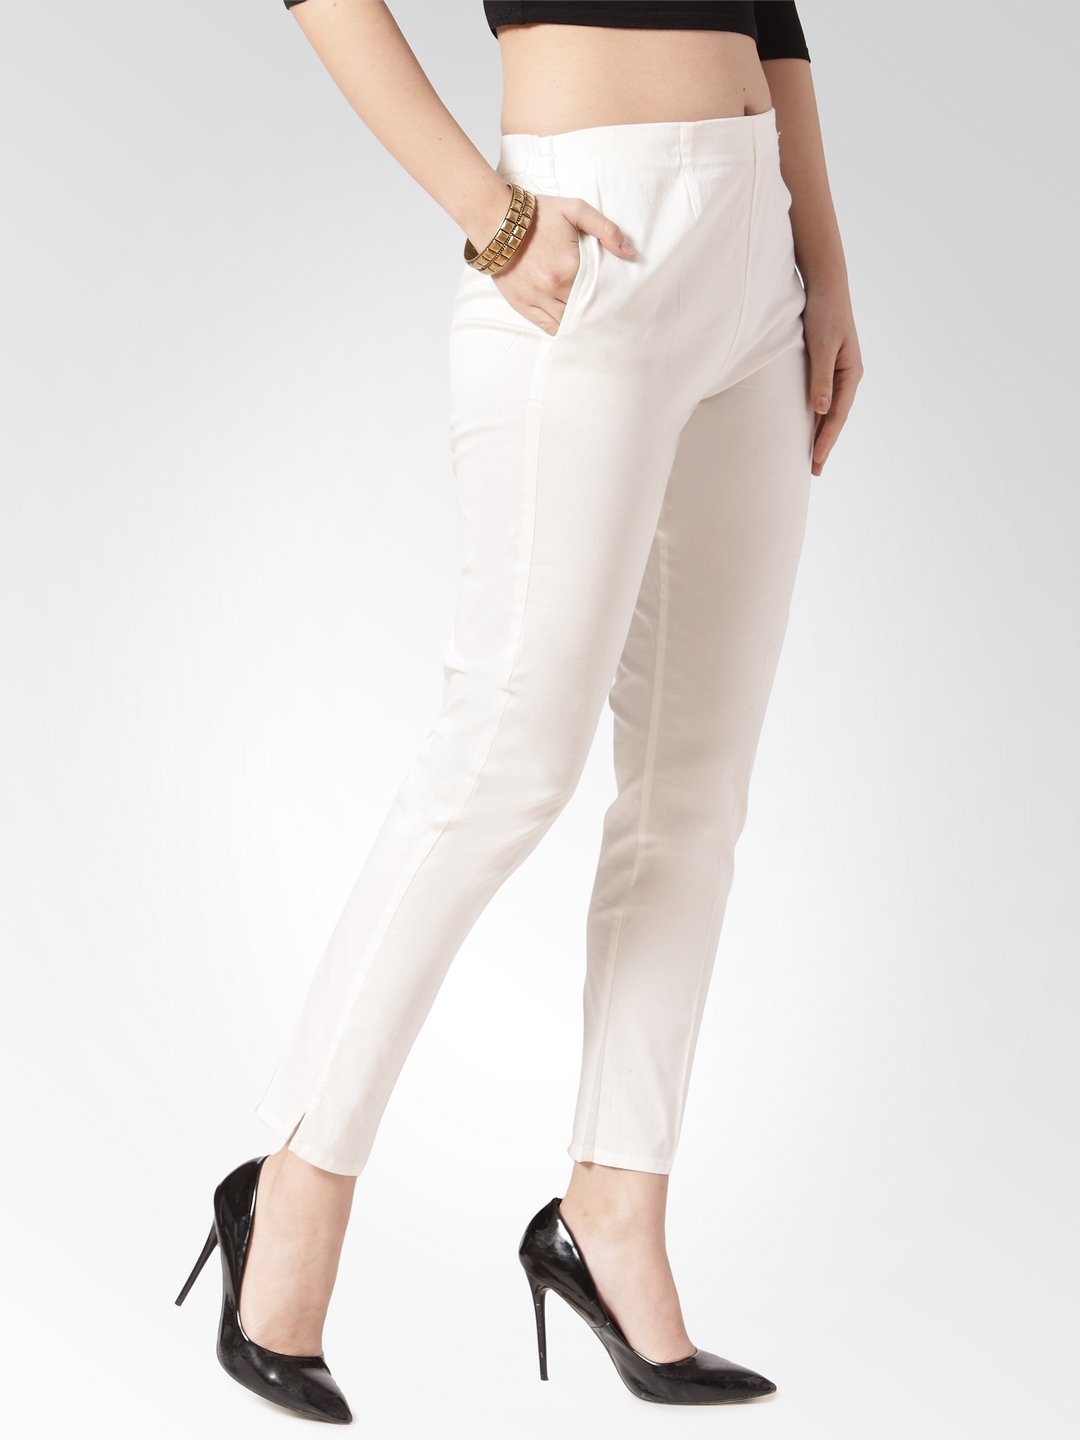 Women's Off White Smart Slim Fit Solid Regular Trousers - Jompers